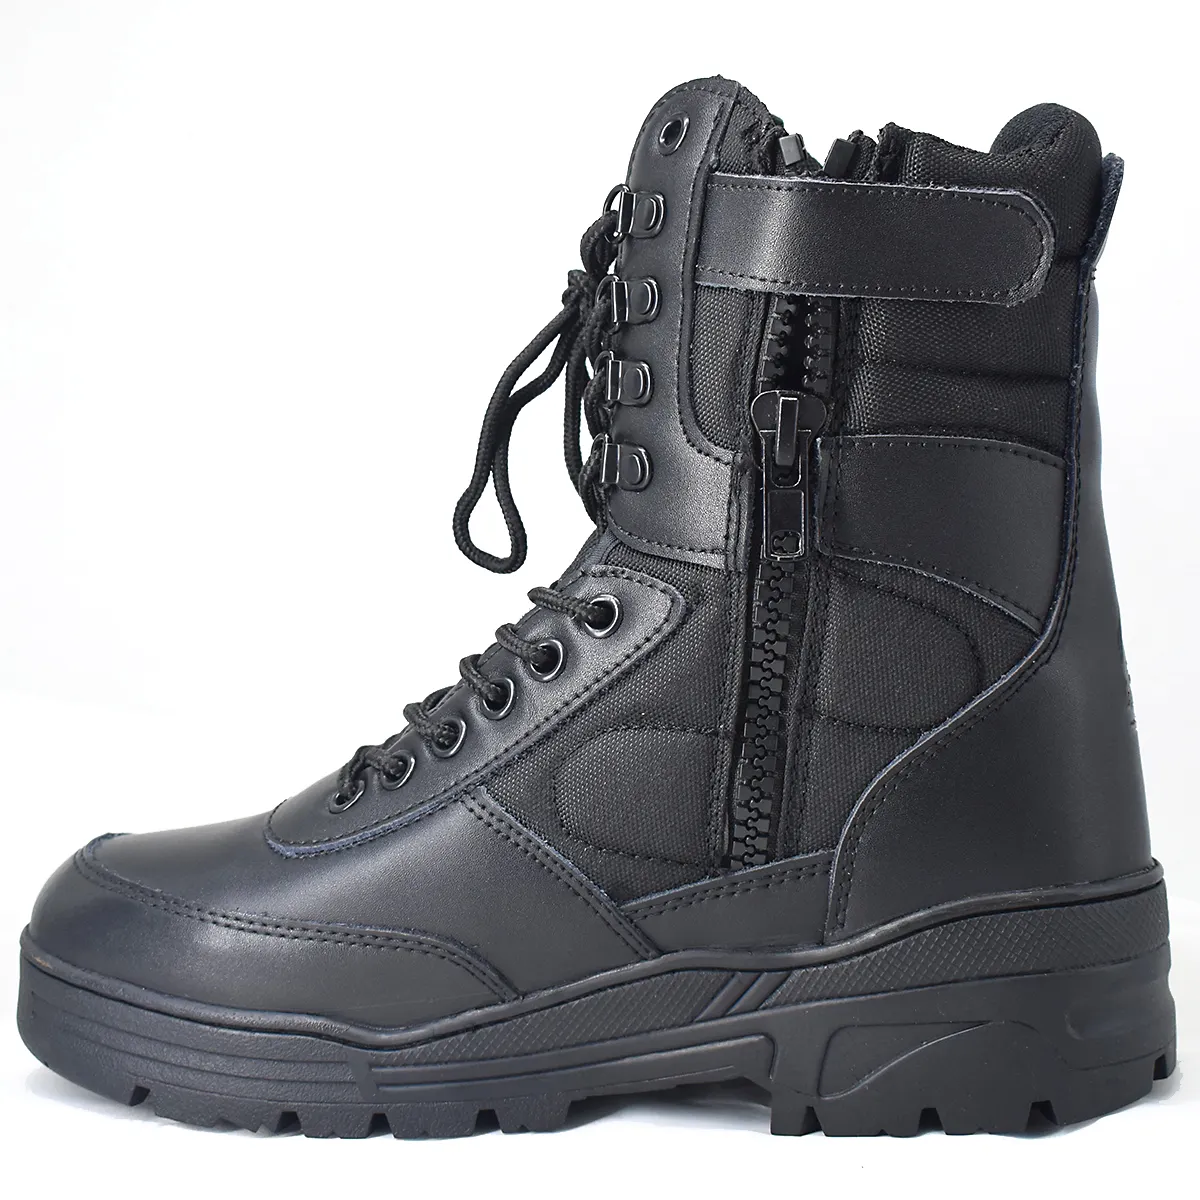 Black Leather Upper Rubber Sole Tactical Boots